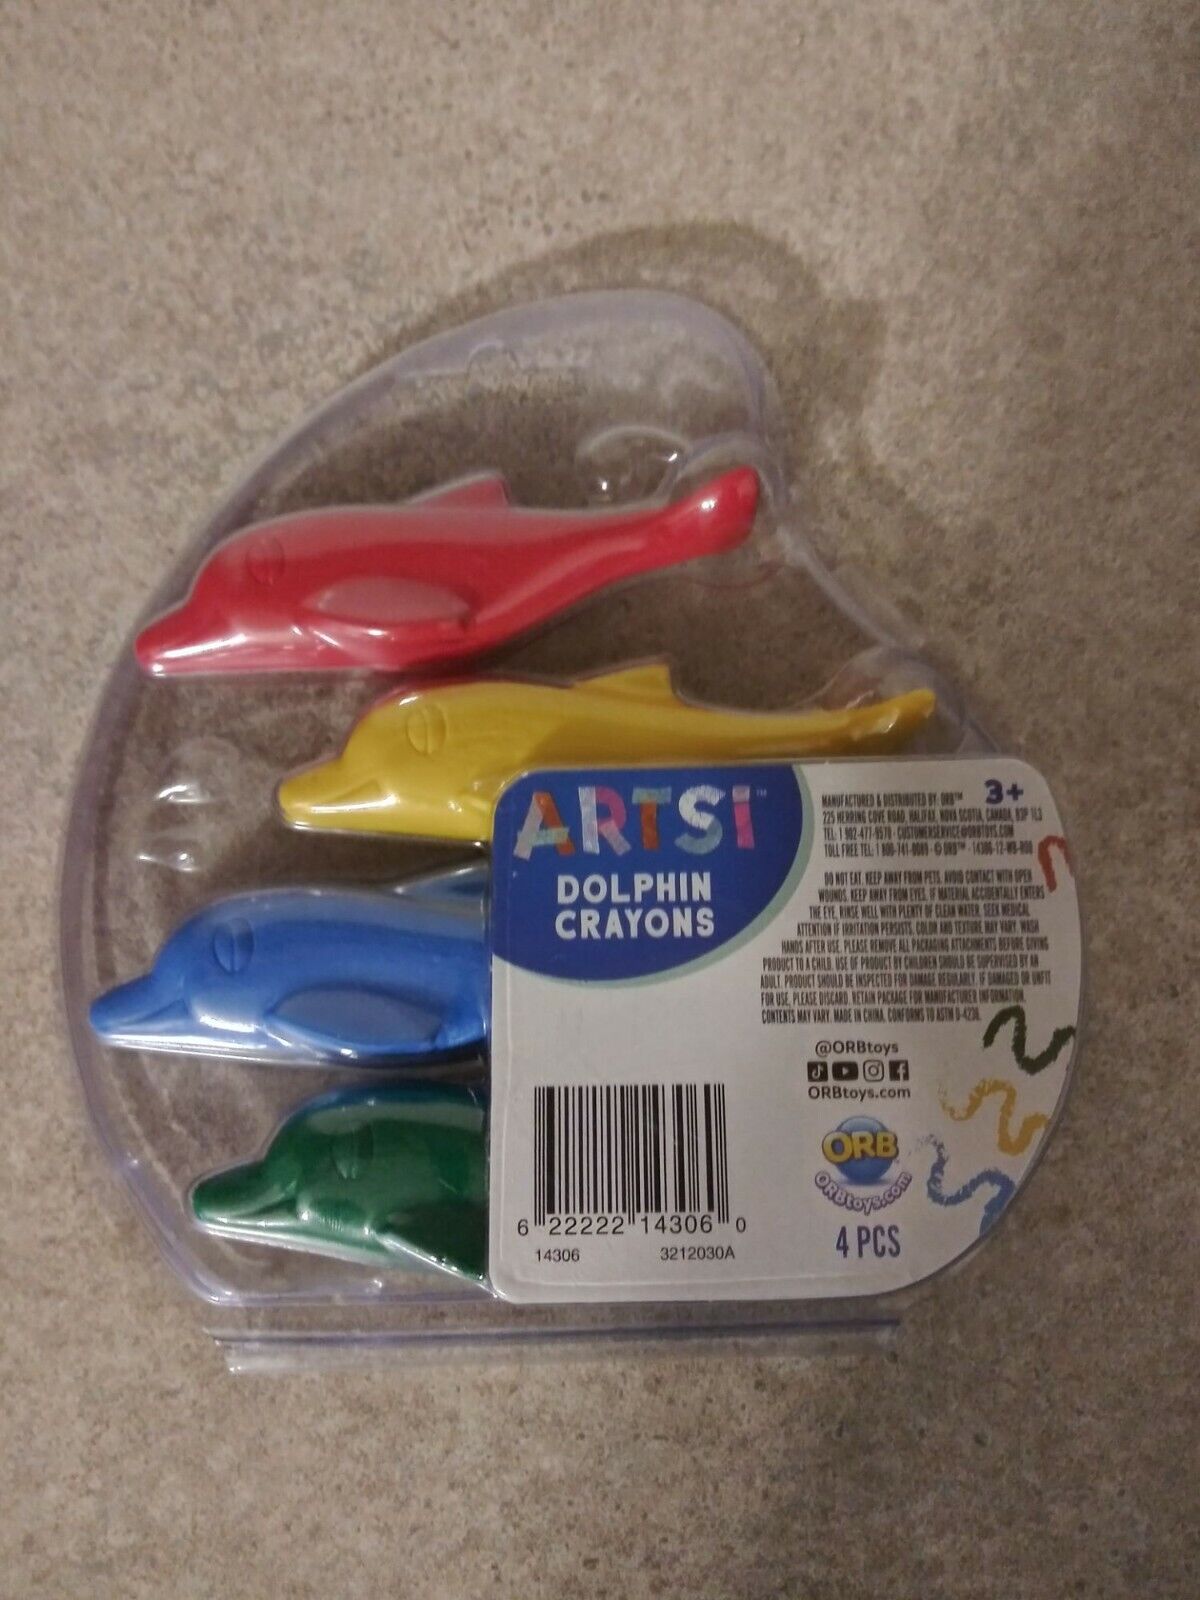 NEW Artsi Dolphin shape Crayons set 4 pc Red, Yellow, Blue, Green